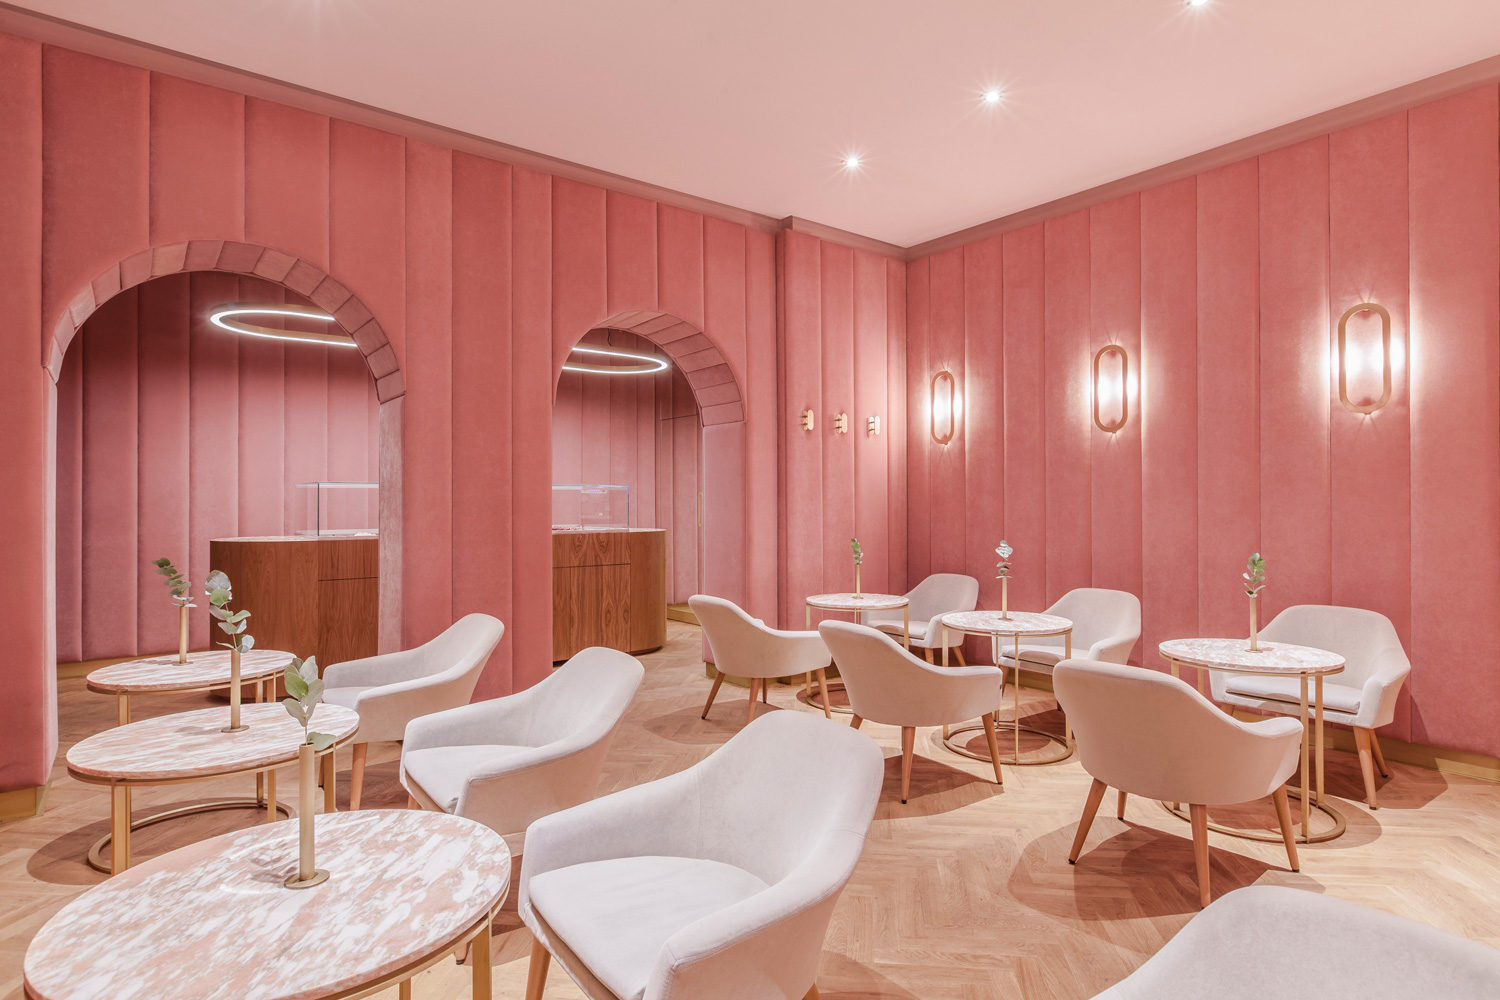 Places: The NANAN Patisserie in Wroclaw, Poland